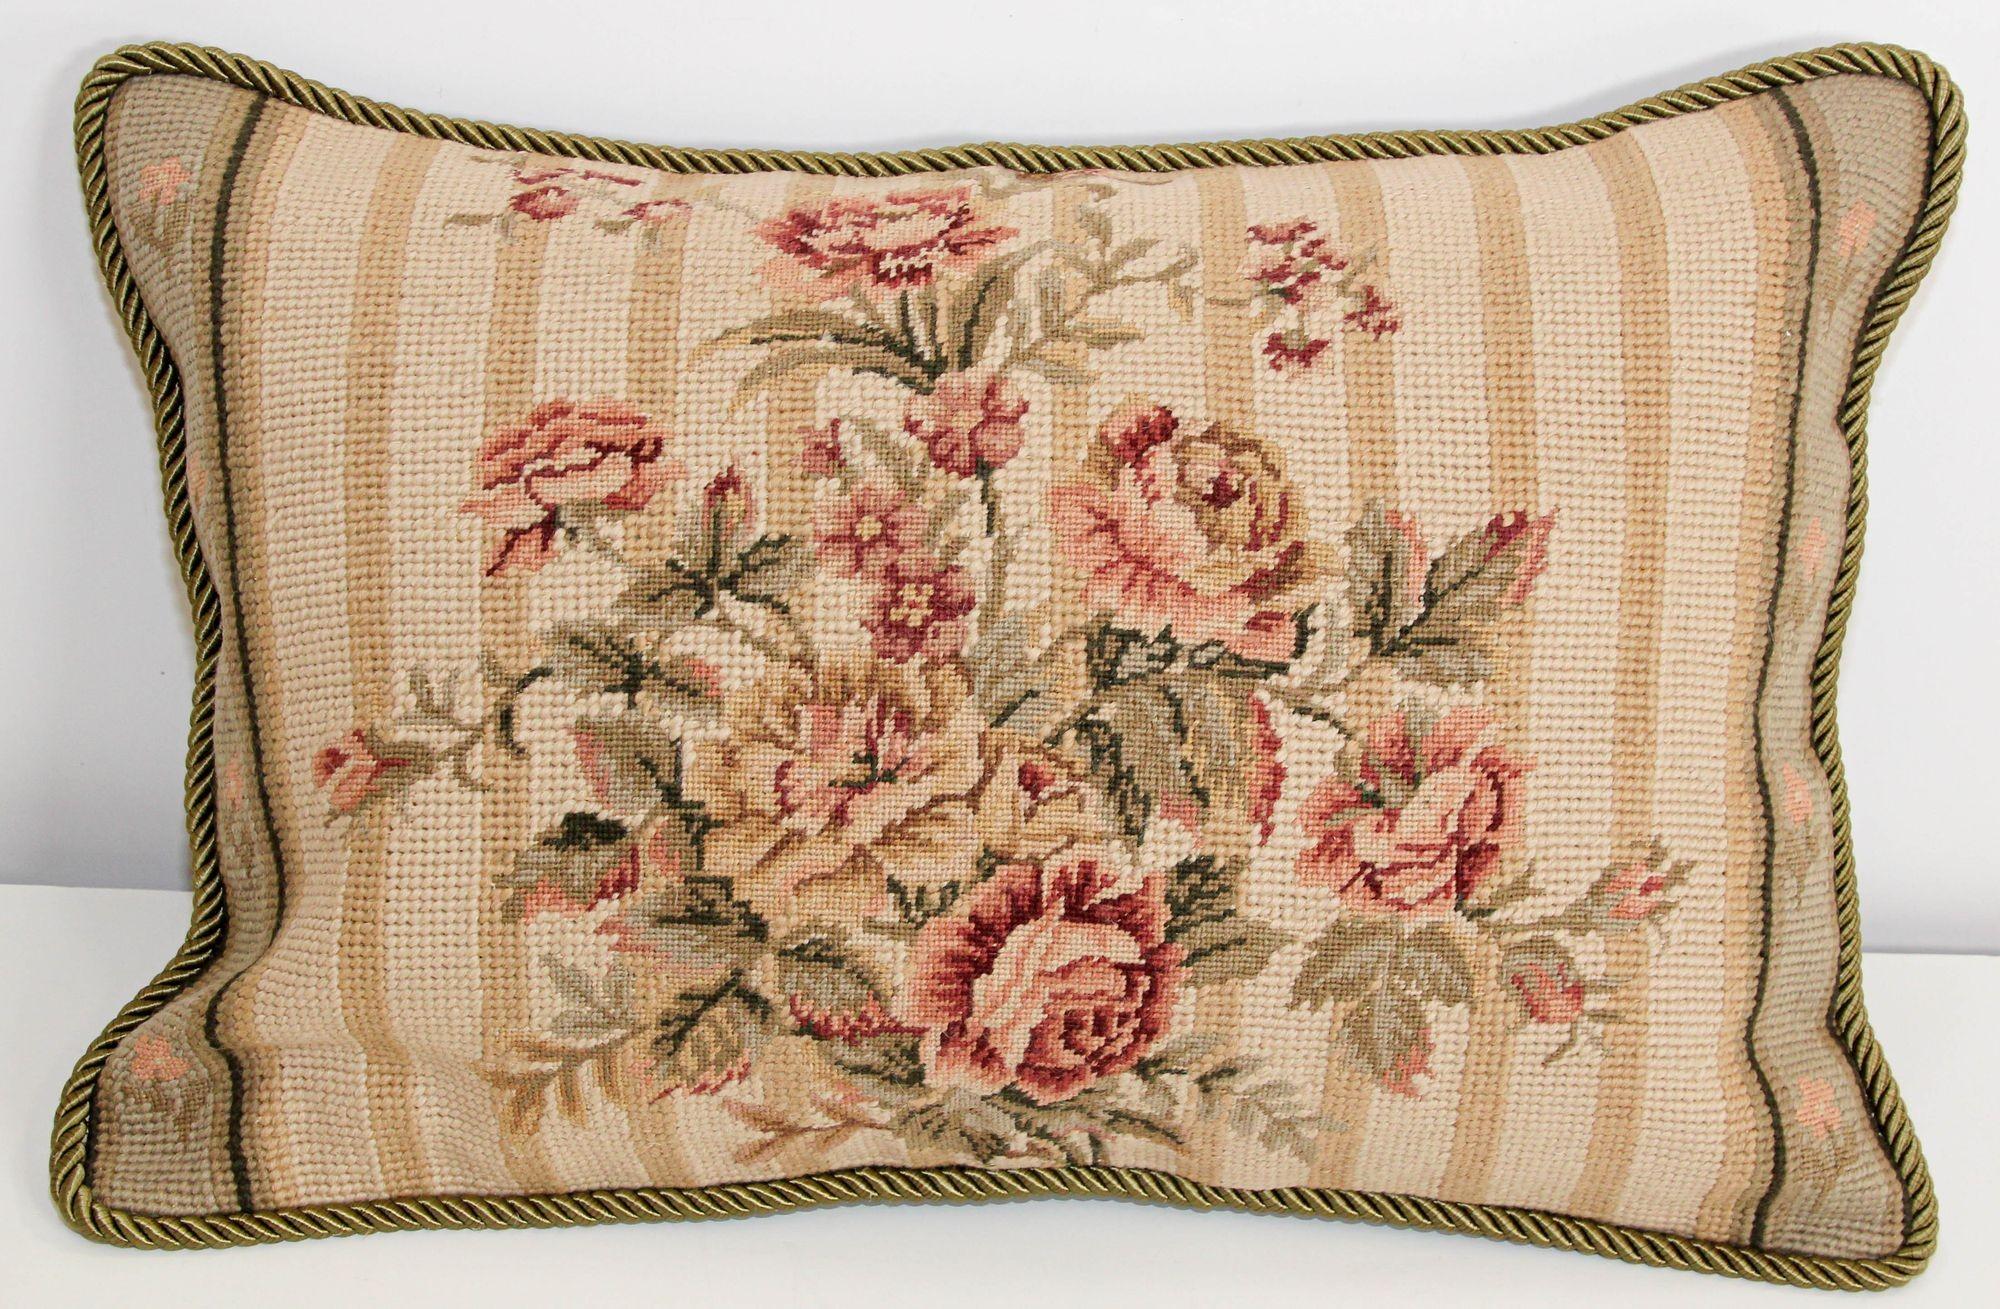 Vintage French Aubusson Tapestry style needlepoint lumbar pillow.
This Aubusson style pillow features a charming bouquet of pink roses, seen in a horizontal format. Their pink and white tones, contrasted with the green hue of the foliage, stand out